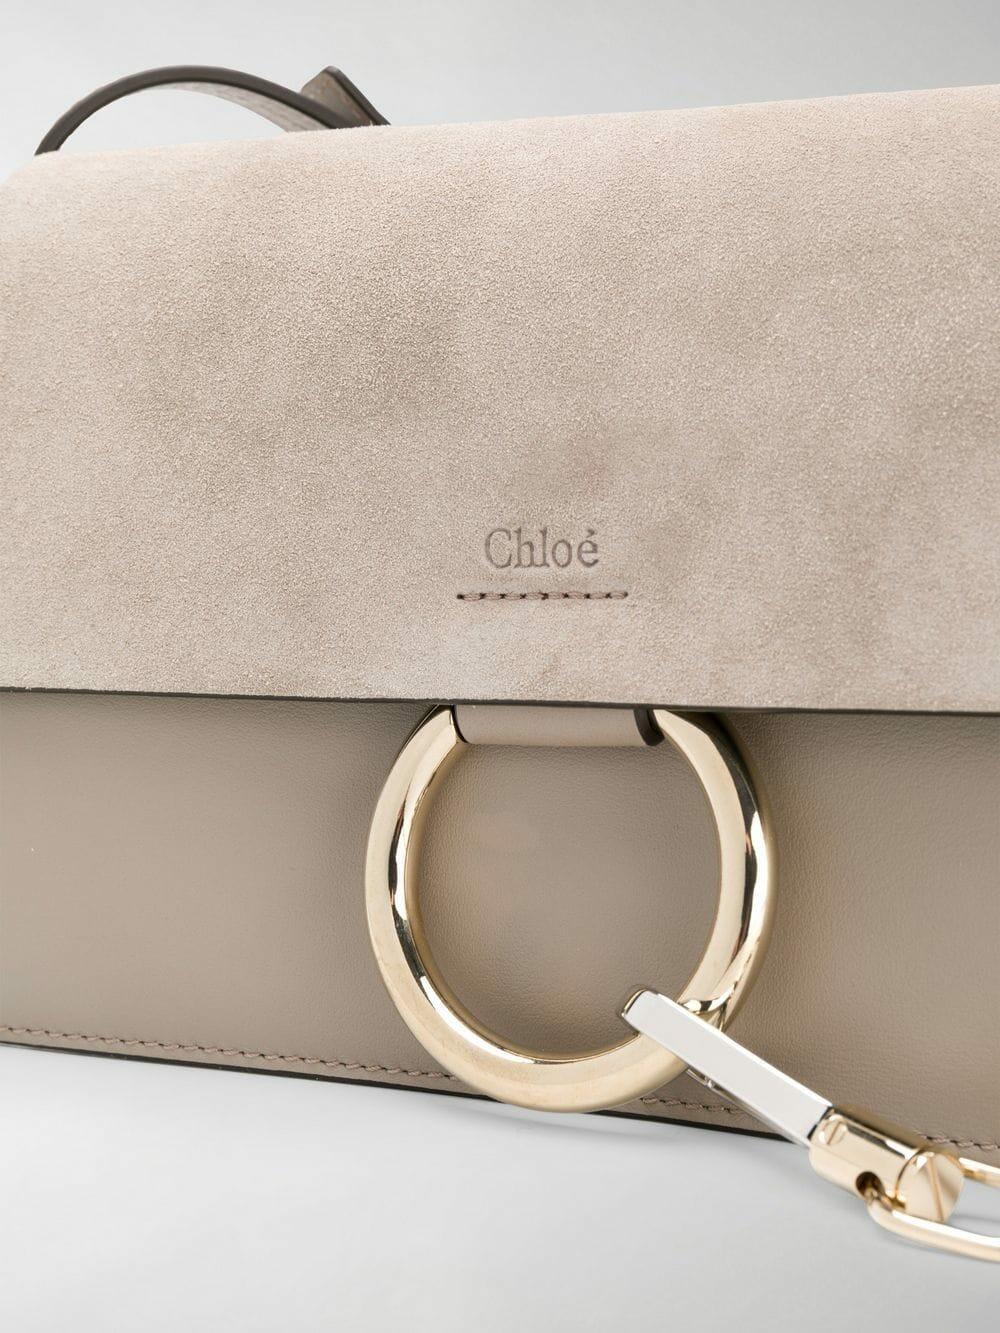 Chloé Faye Mini Leather And Suede Cross-body Bag in Gray